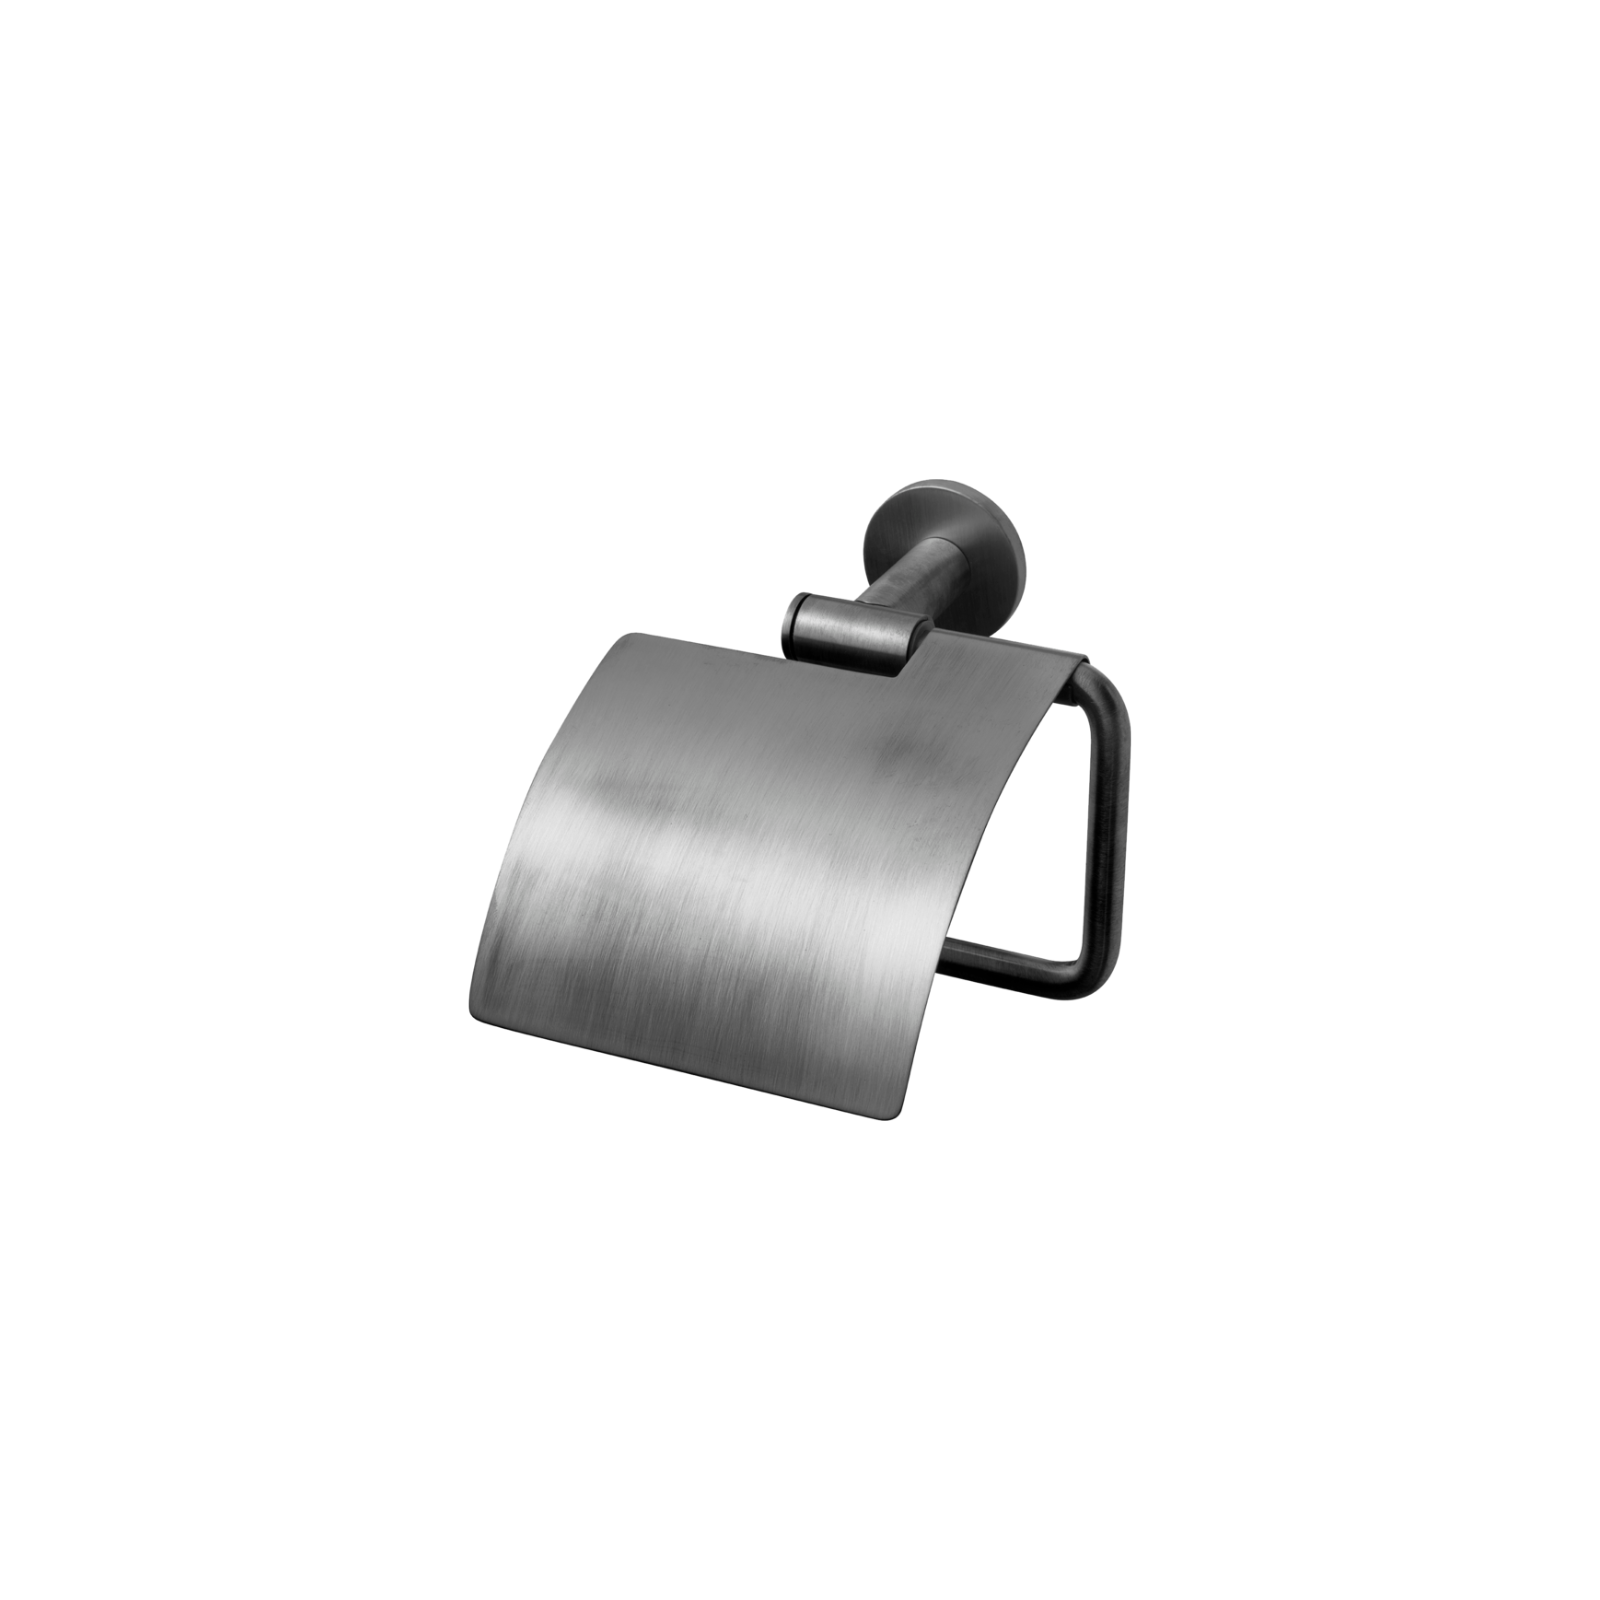 Tapwell Toalettpappershållare med lock TA236 Brushed Black chrome